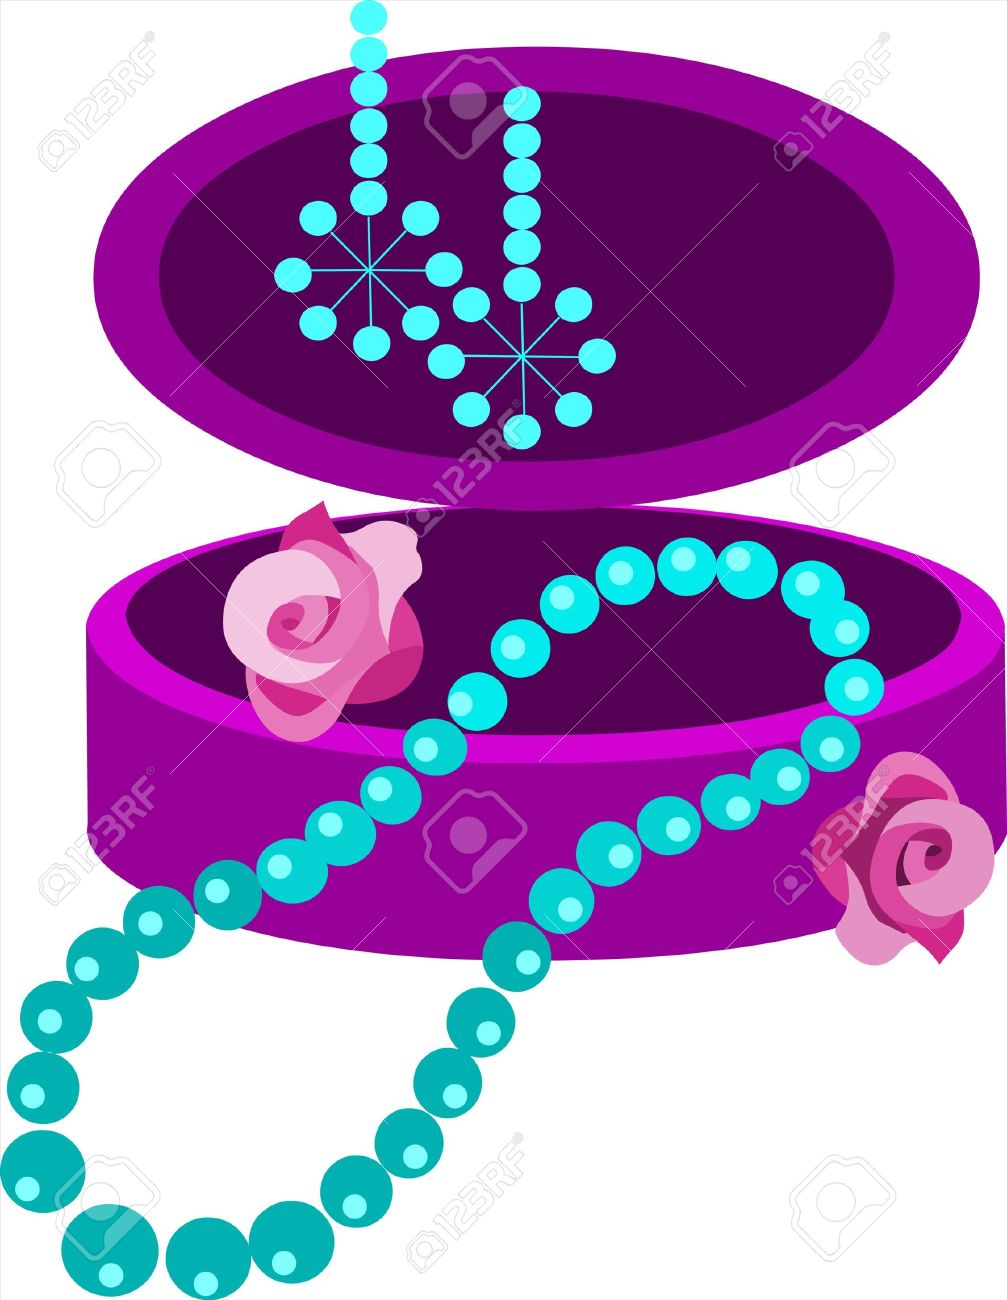 Jewelry Cartoon Clipart | Free download on ClipArtMag